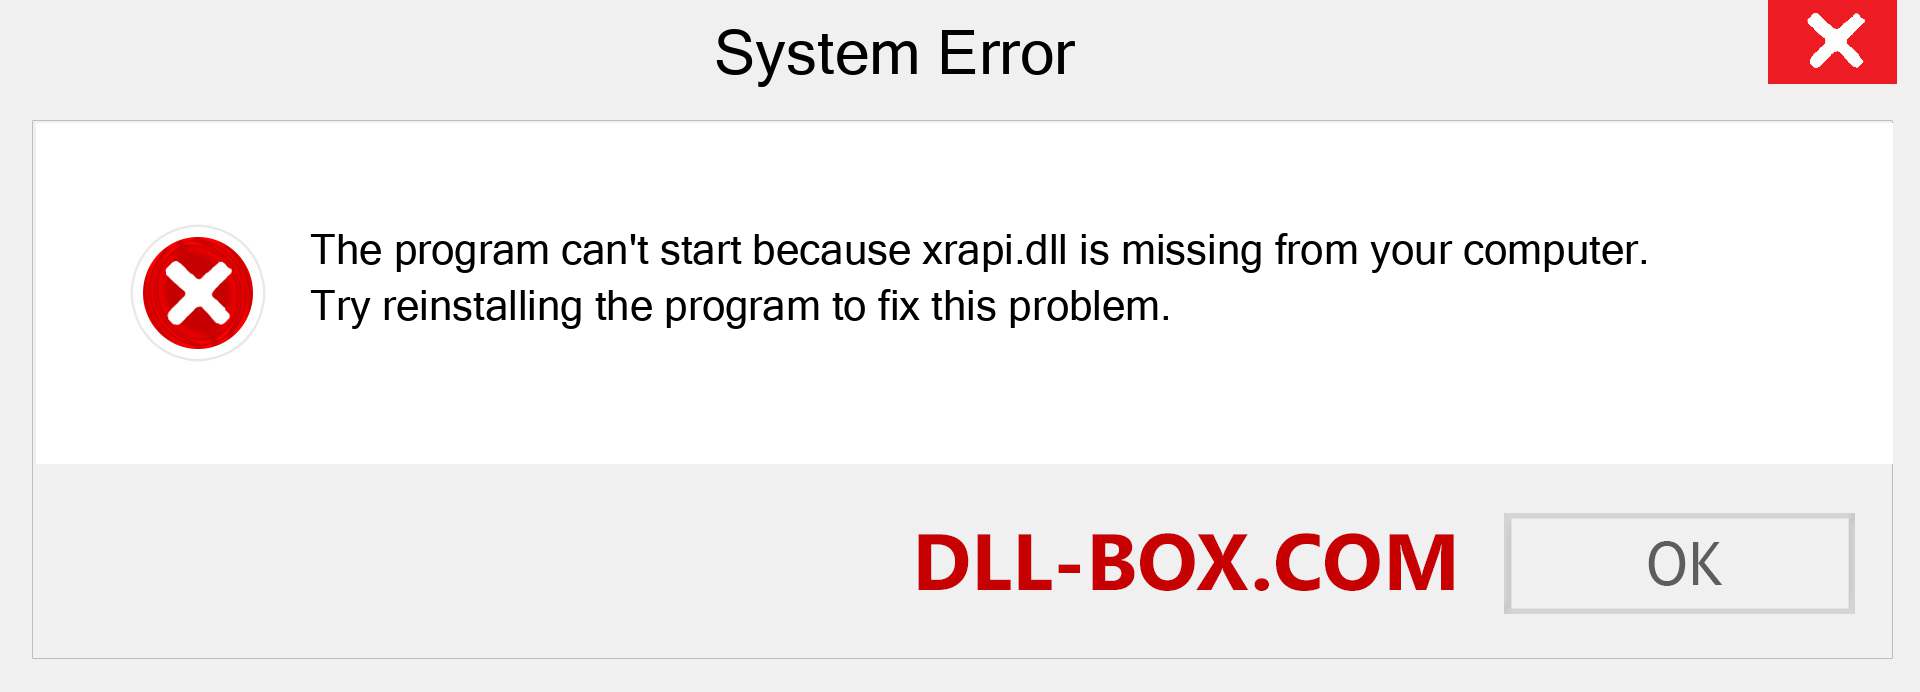  xrapi.dll file is missing?. Download for Windows 7, 8, 10 - Fix  xrapi dll Missing Error on Windows, photos, images